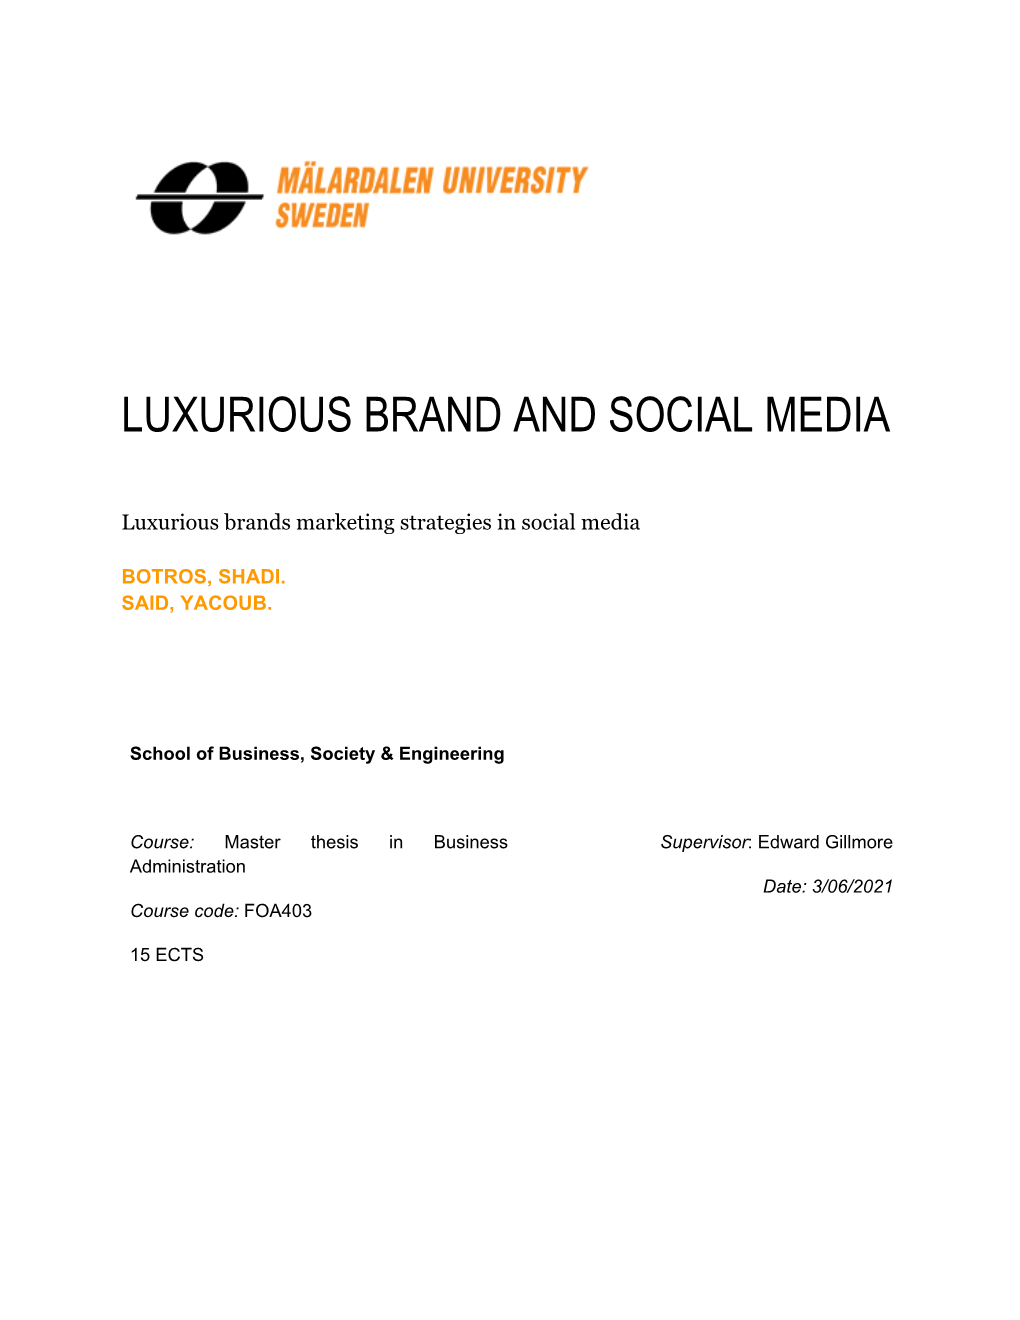 Luxurious Brand and Social Media